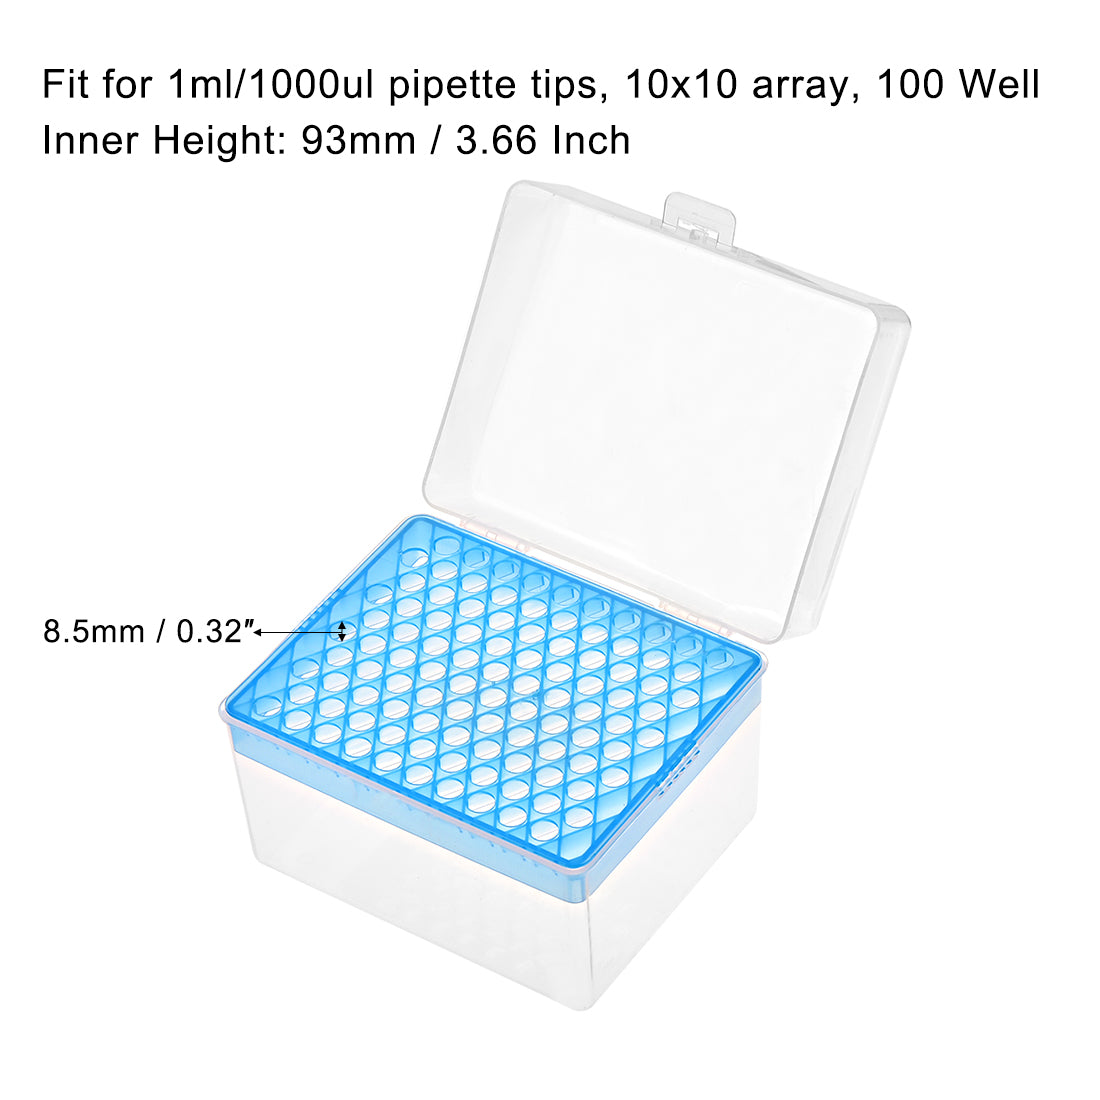 uxcell Uxcell Pipette Tips Box 100-Well Polypropylene Tip Holder Container for 1ml /1000ul Pipettor 8.5mm Hole Diameter 2Pcs